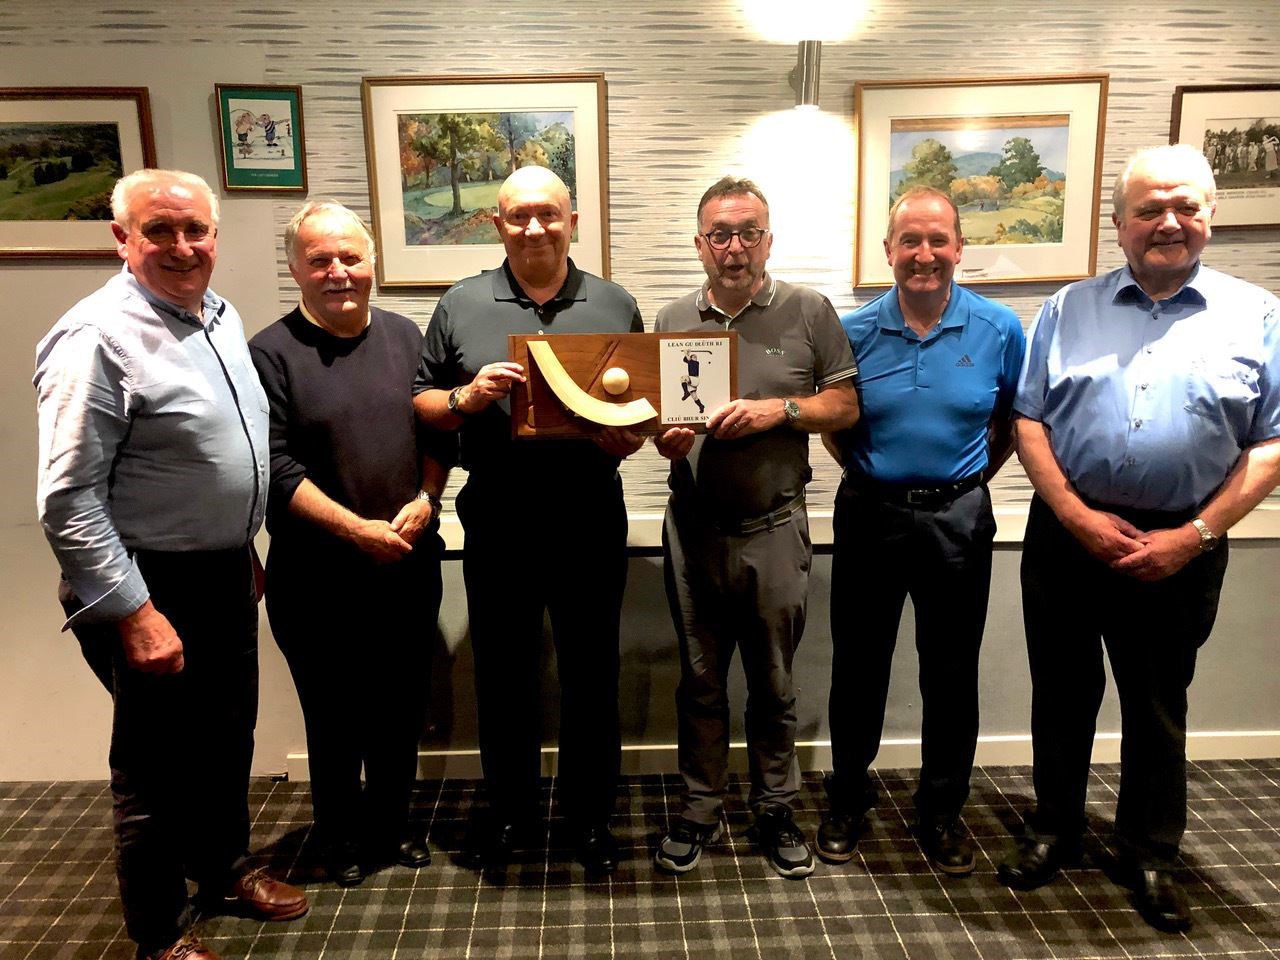 The winning team with the trophy andJohn MacKenzie MBE (far left) along with David MacMaster (far right).